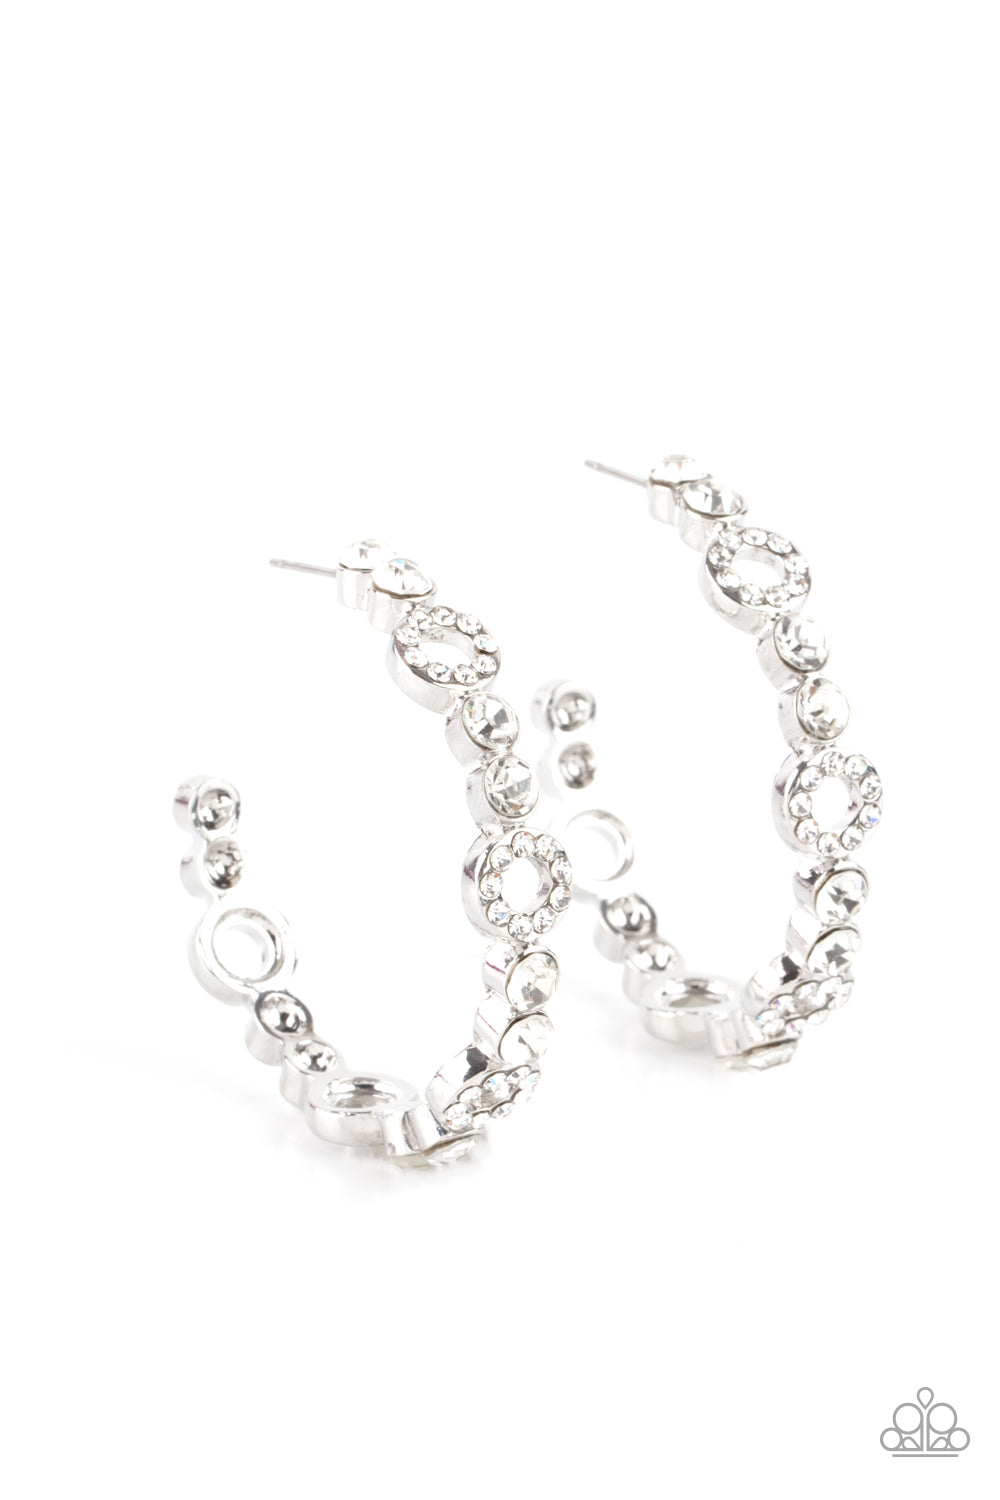 Paparazzi Swoon-Worthy Sparkle Hoops